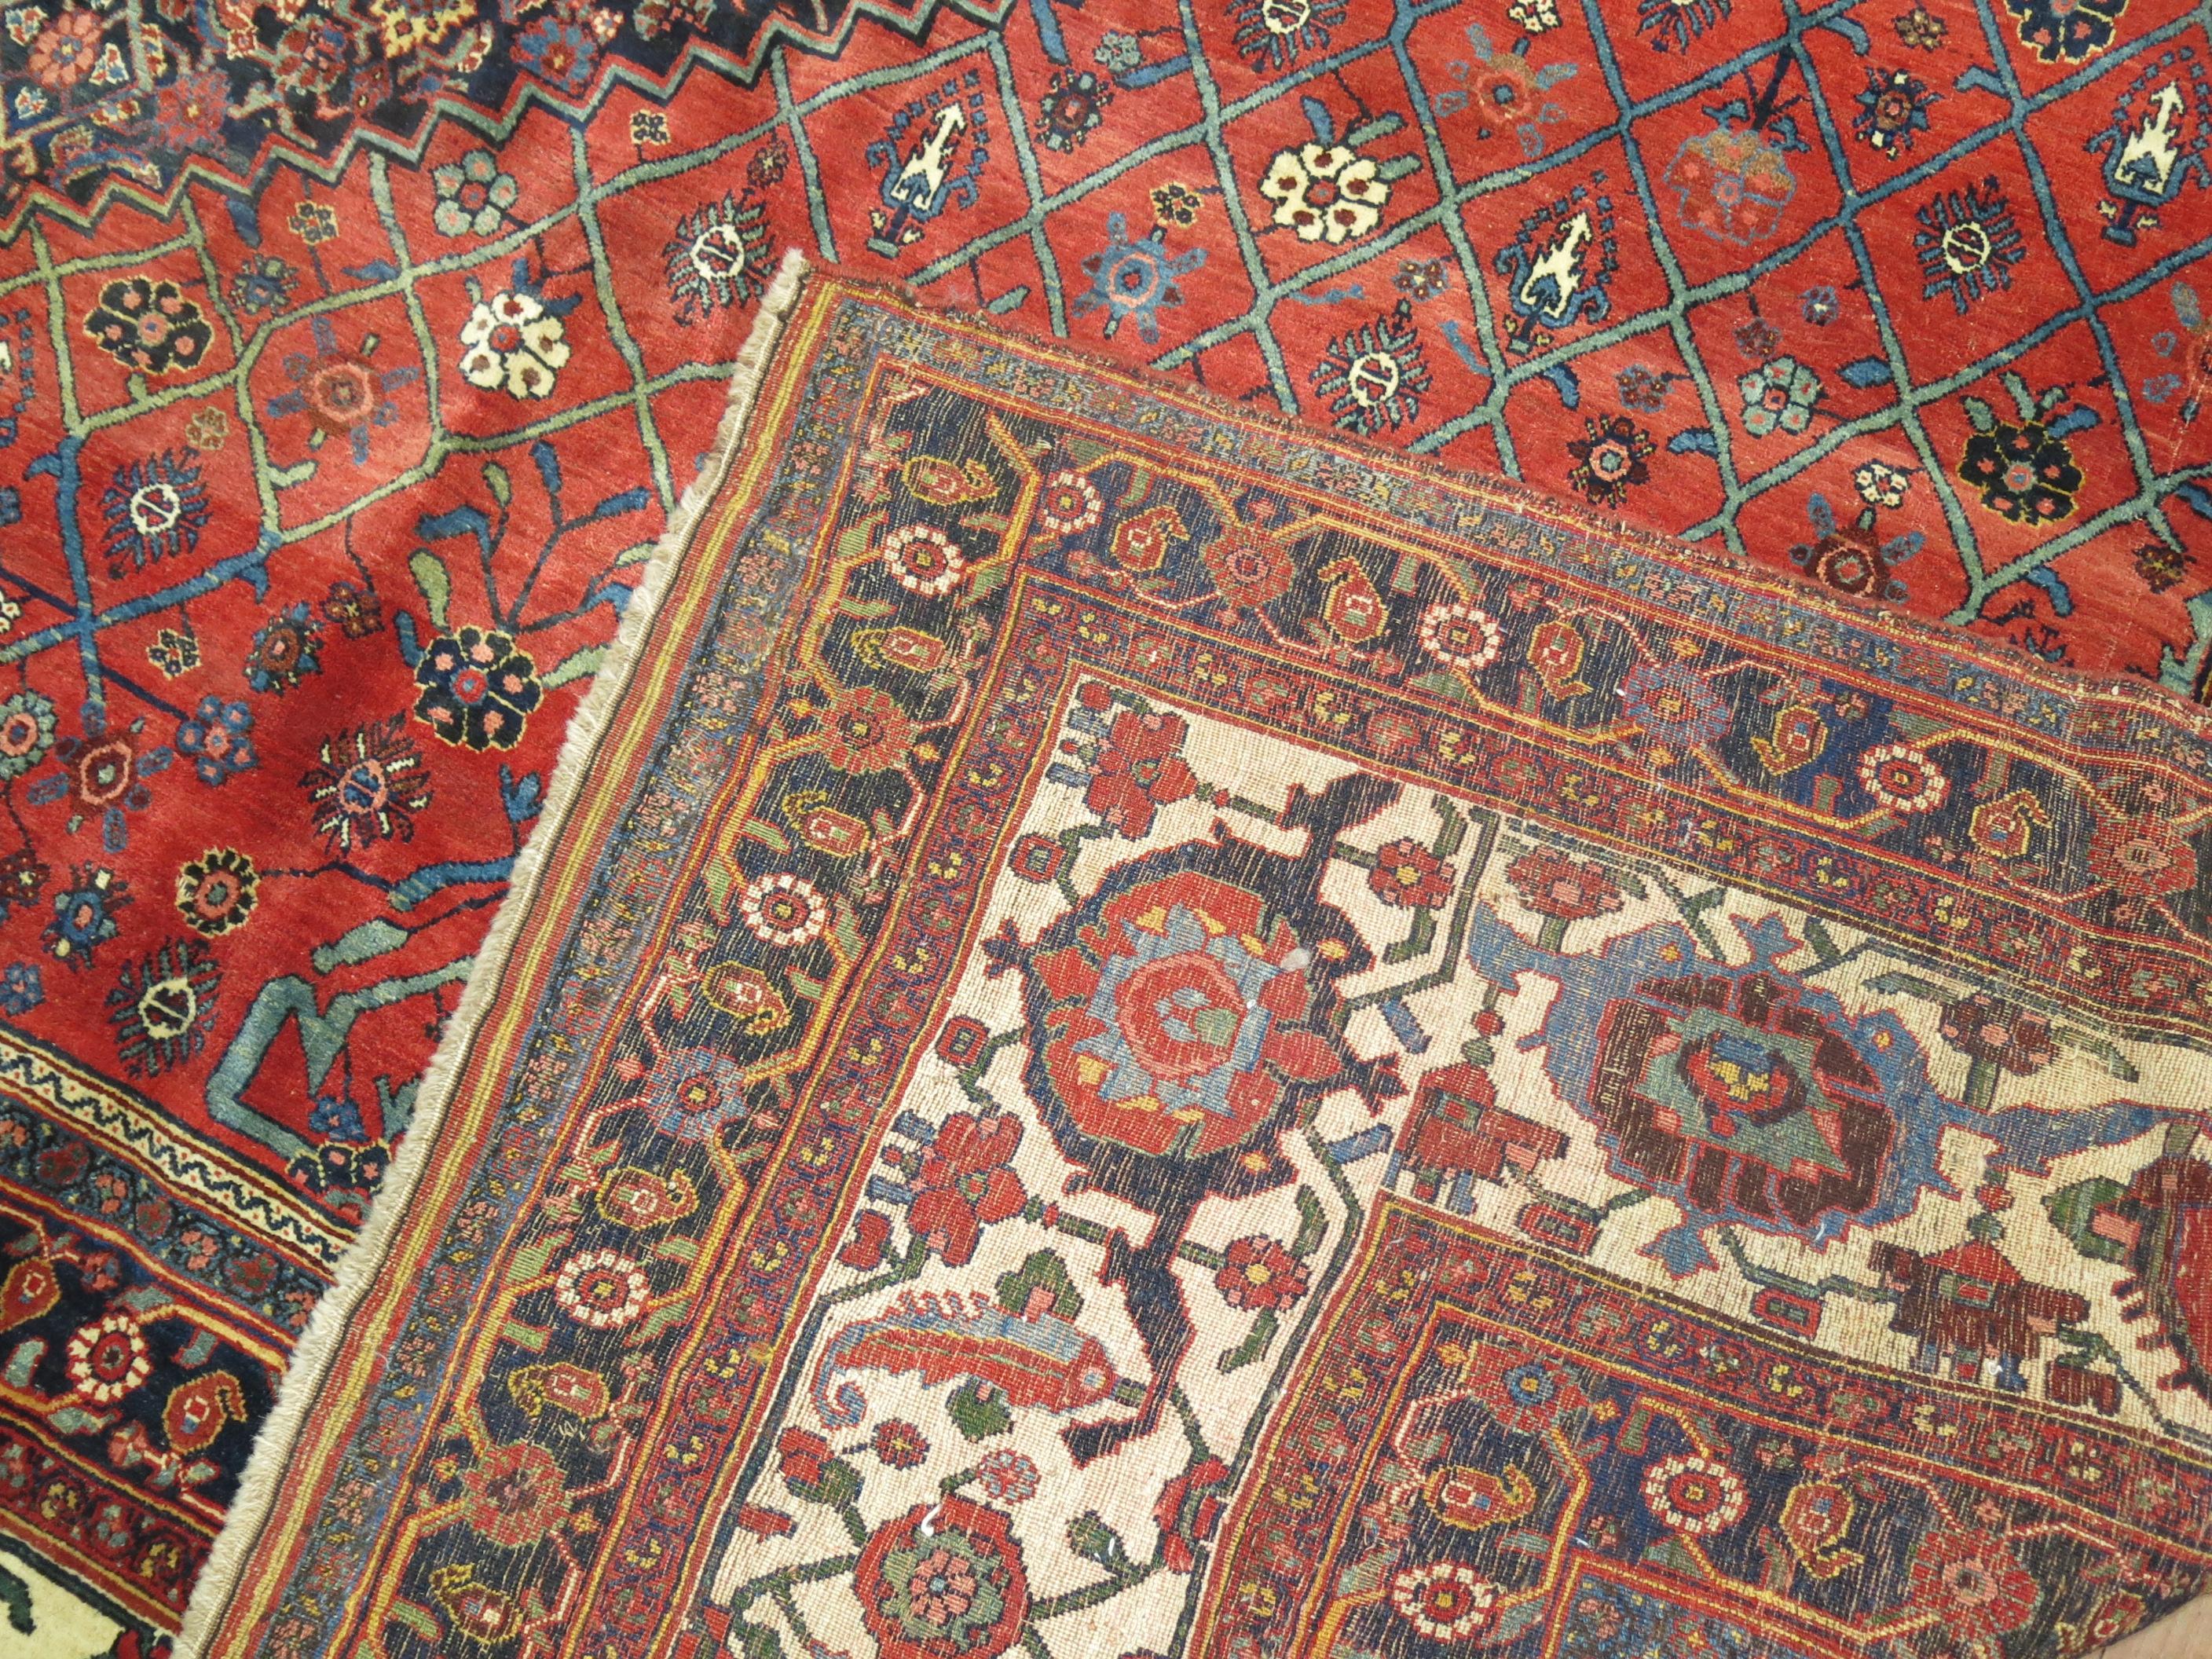 An authentic one of a kind Classical Palace size antique Persian Bidjar rug in astonishing excellent full pile condition.

Bidjar carpets are world renowned for their superb artistry, craftsmanship, and excellent material, and can be distinguished